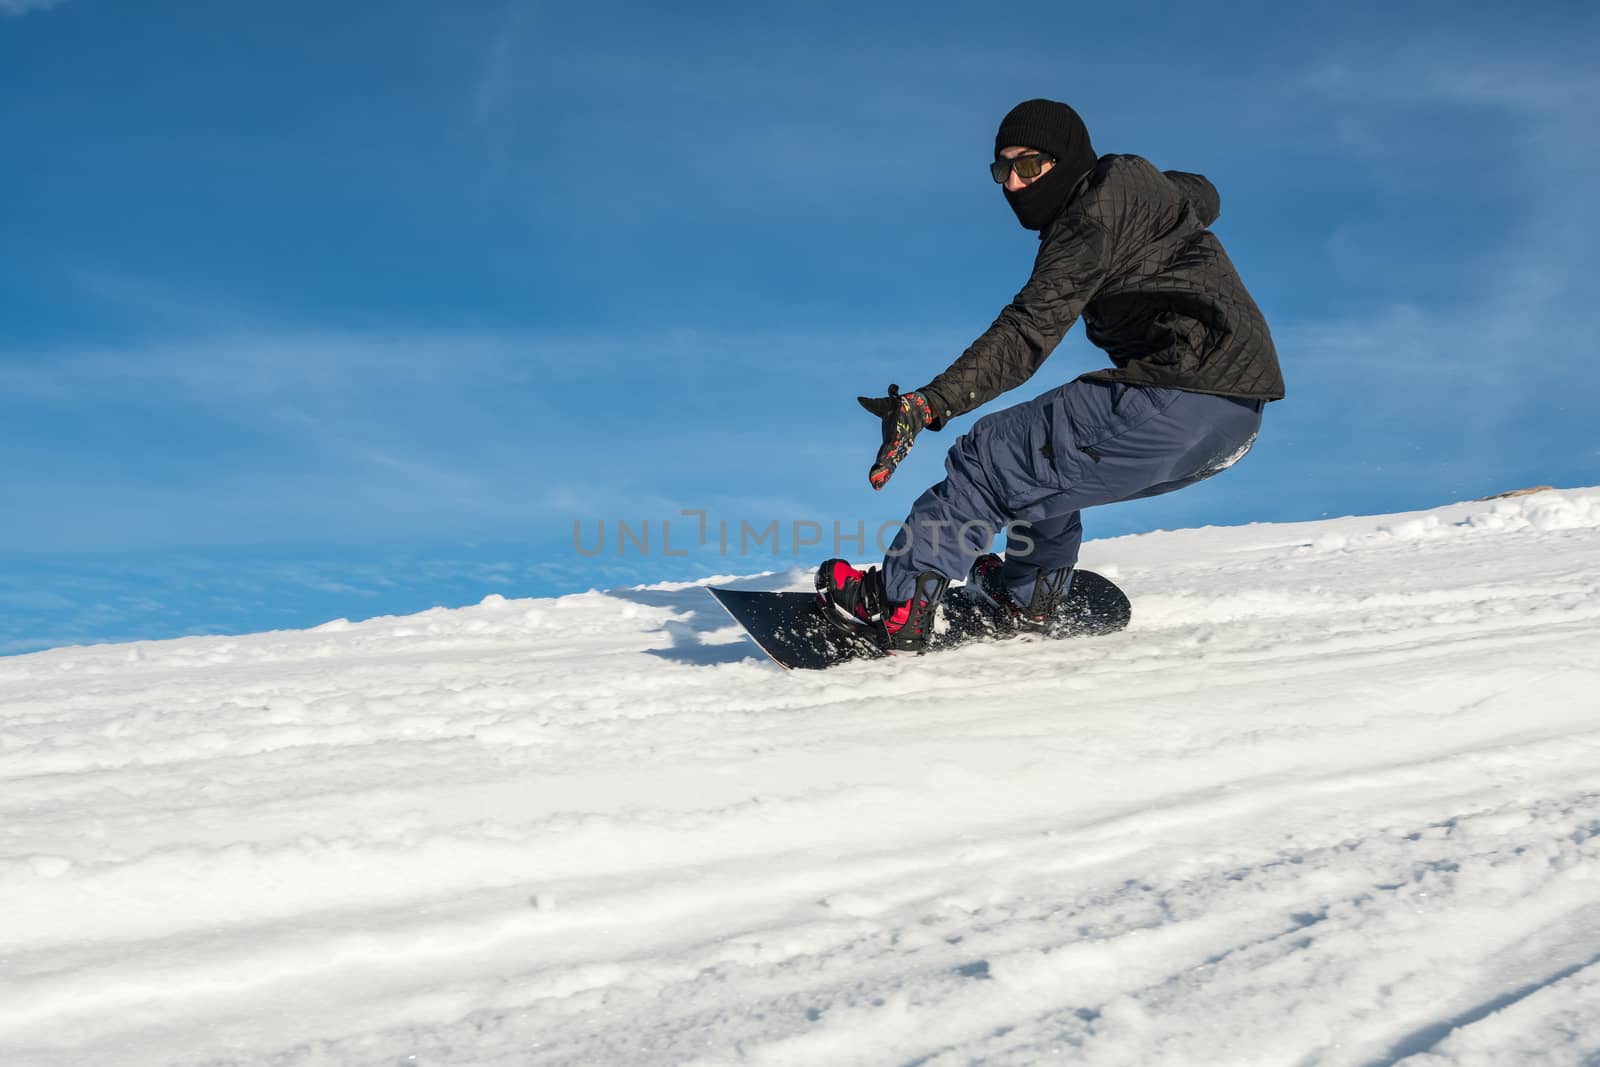 Snowboard freerider in the mountains against in blue sky.